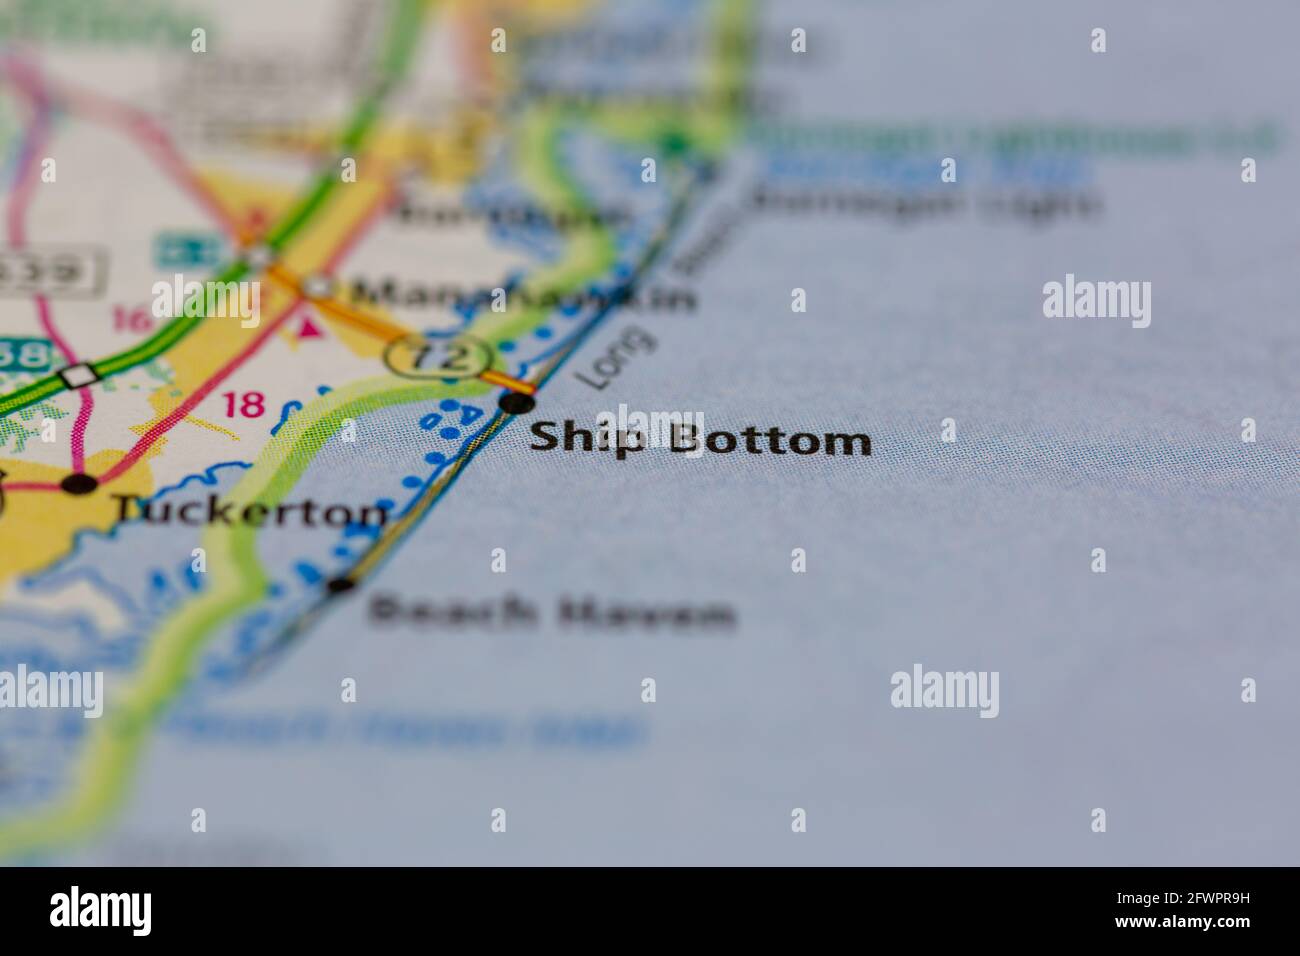 Ship Bottom New Jersey USA shown on a Geography map or road map Stock Photo